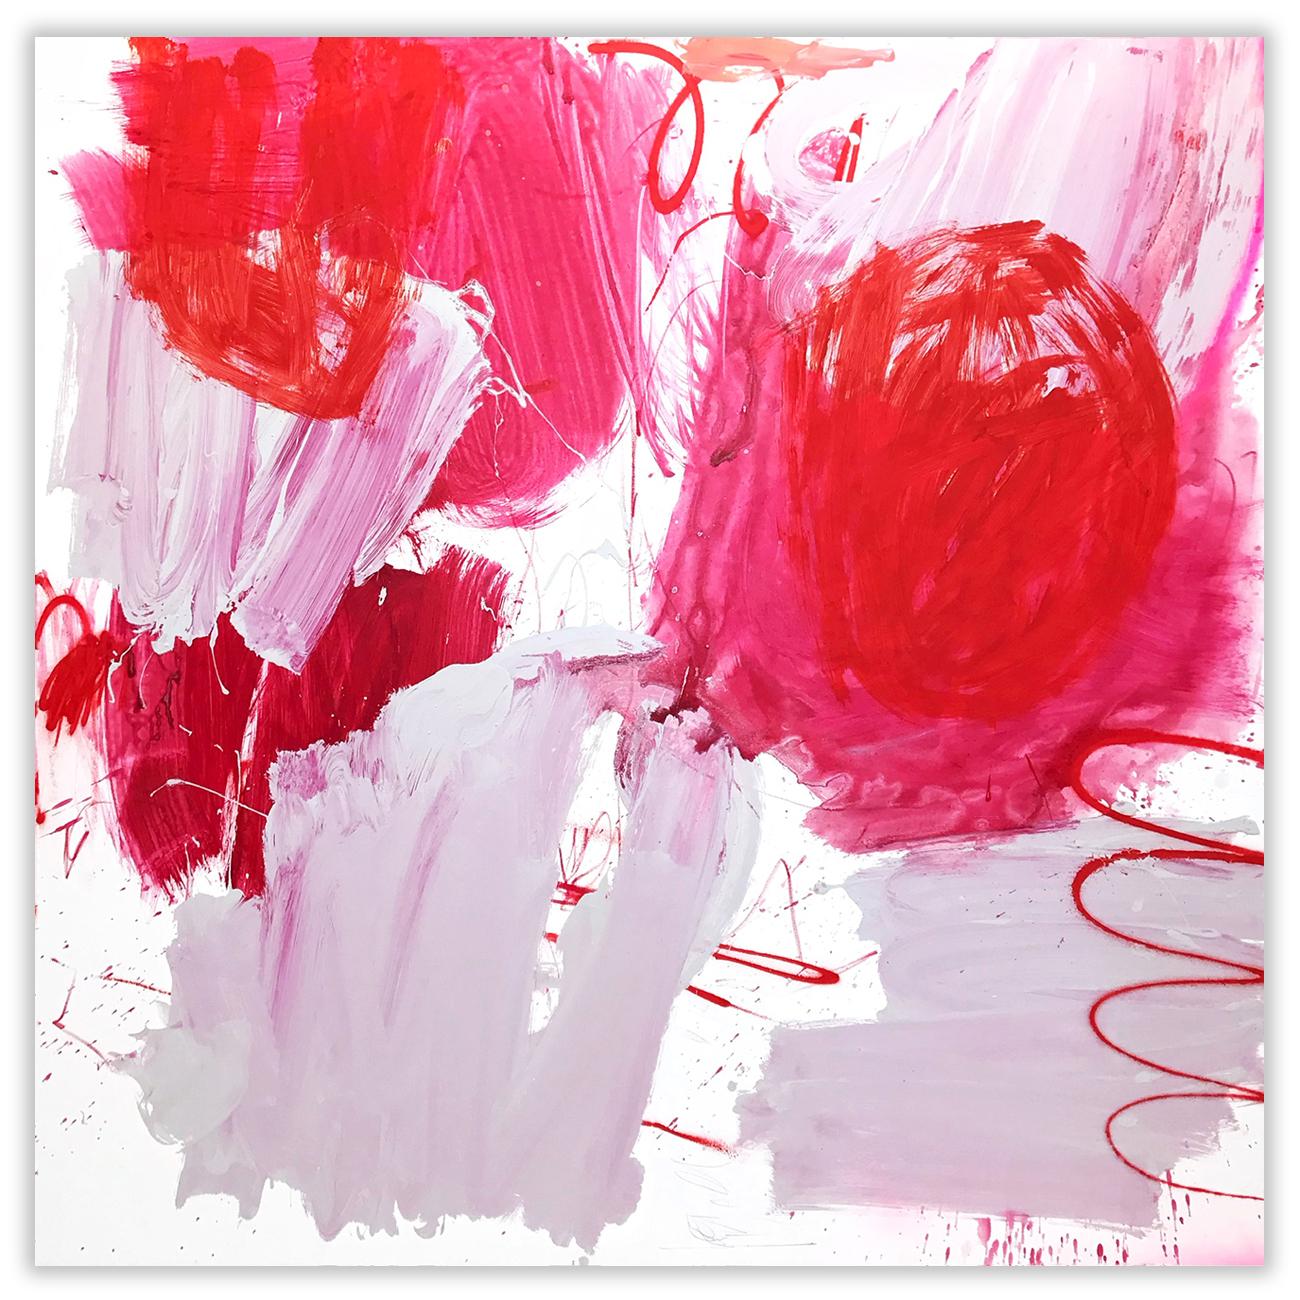 Manuela Karin Knaut Abstract Painting - Cherry Pie 2 (Abstract painting)